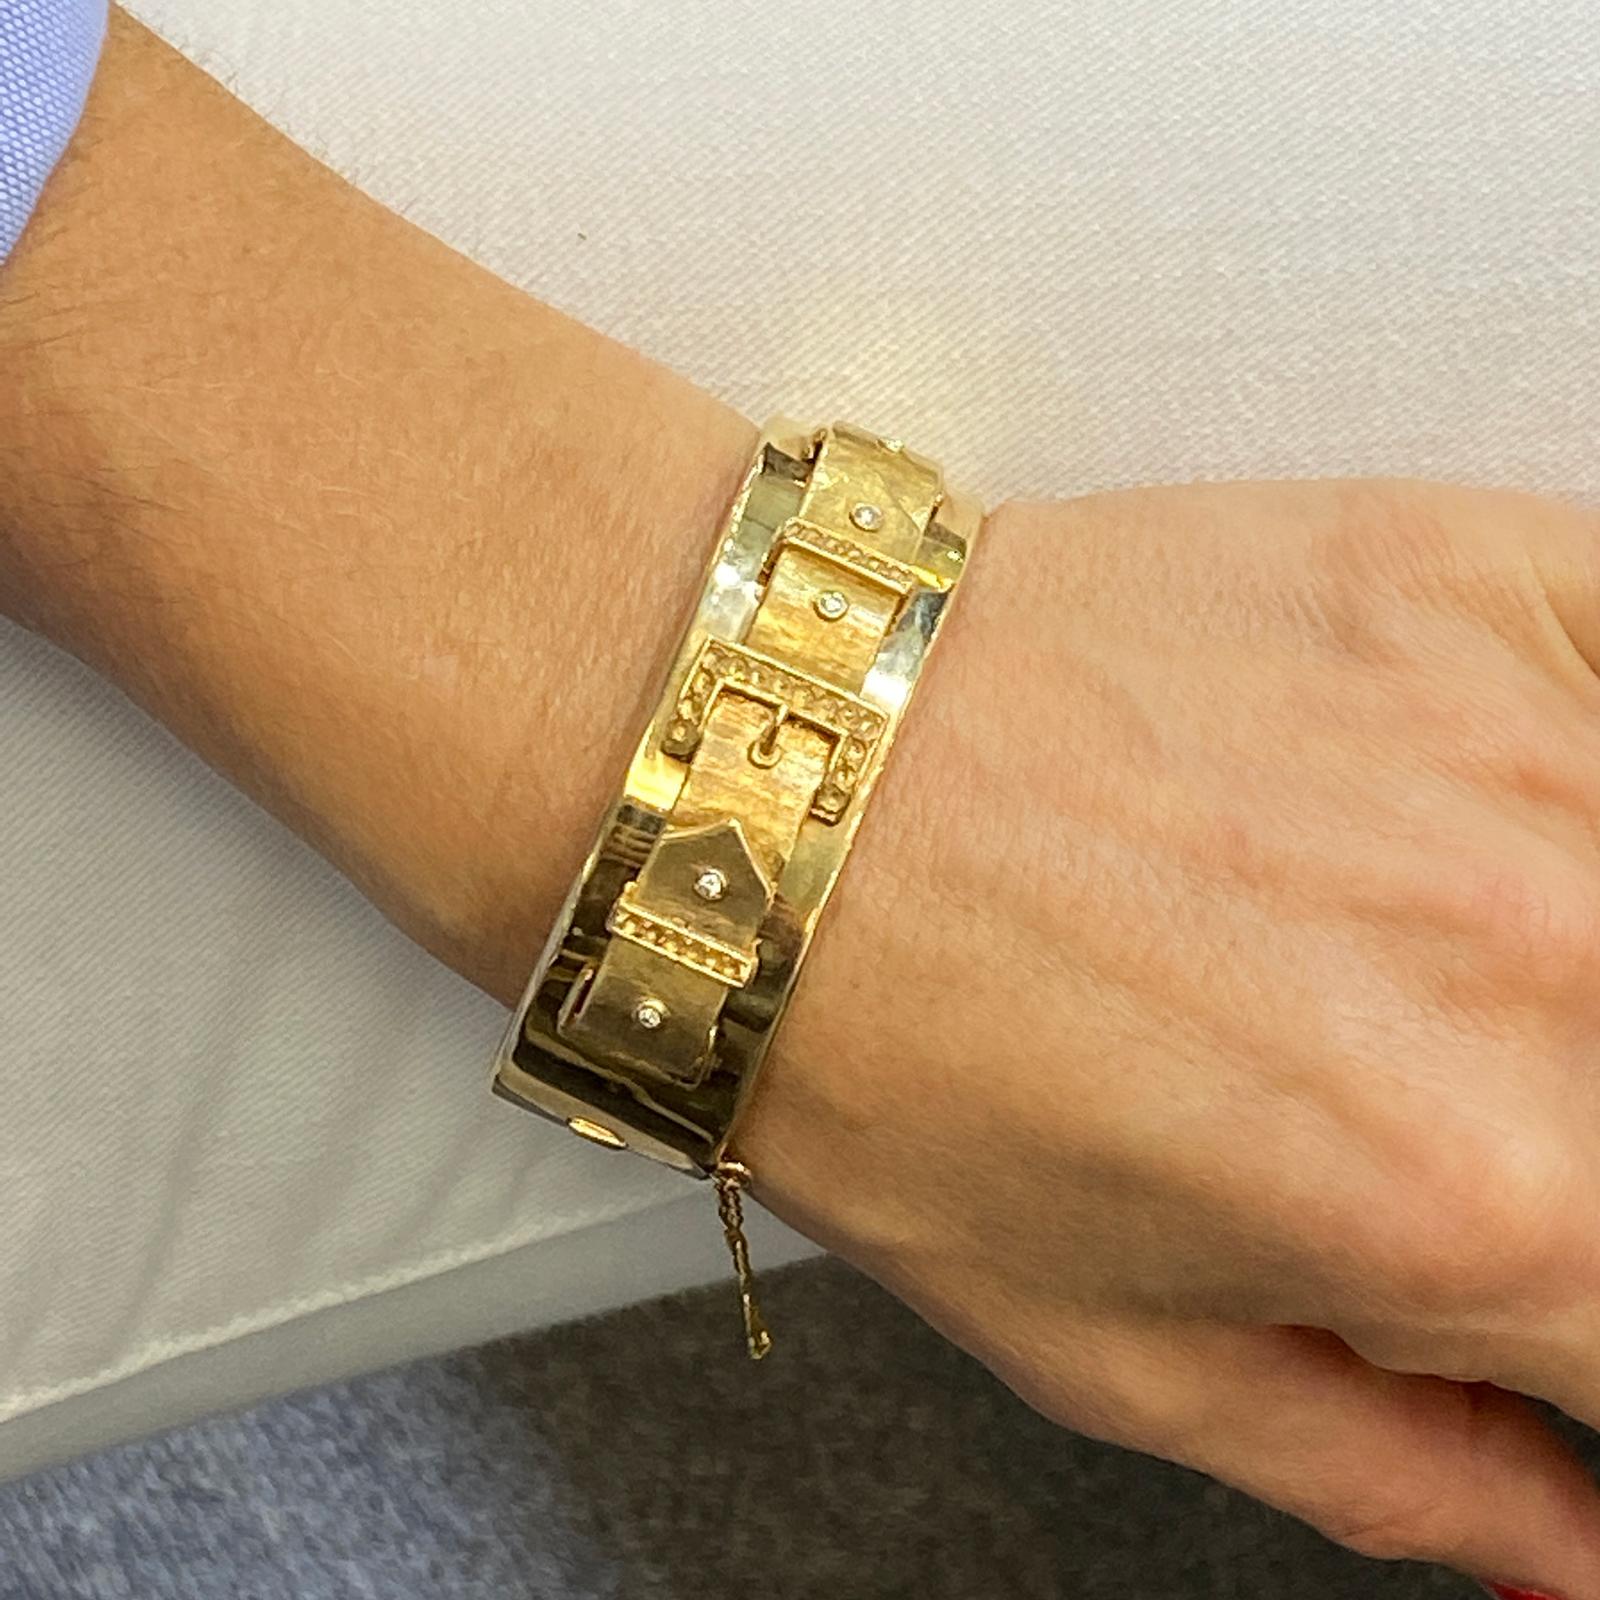 Fabulous 1950's hinged bangle bracelet fashioned in 14 karat yellow gold. The bangle features a 3D buckle design with 5 diamond accents. The bangle measures 7 inches in internal circumference, and .75 inches in width. We have left the original